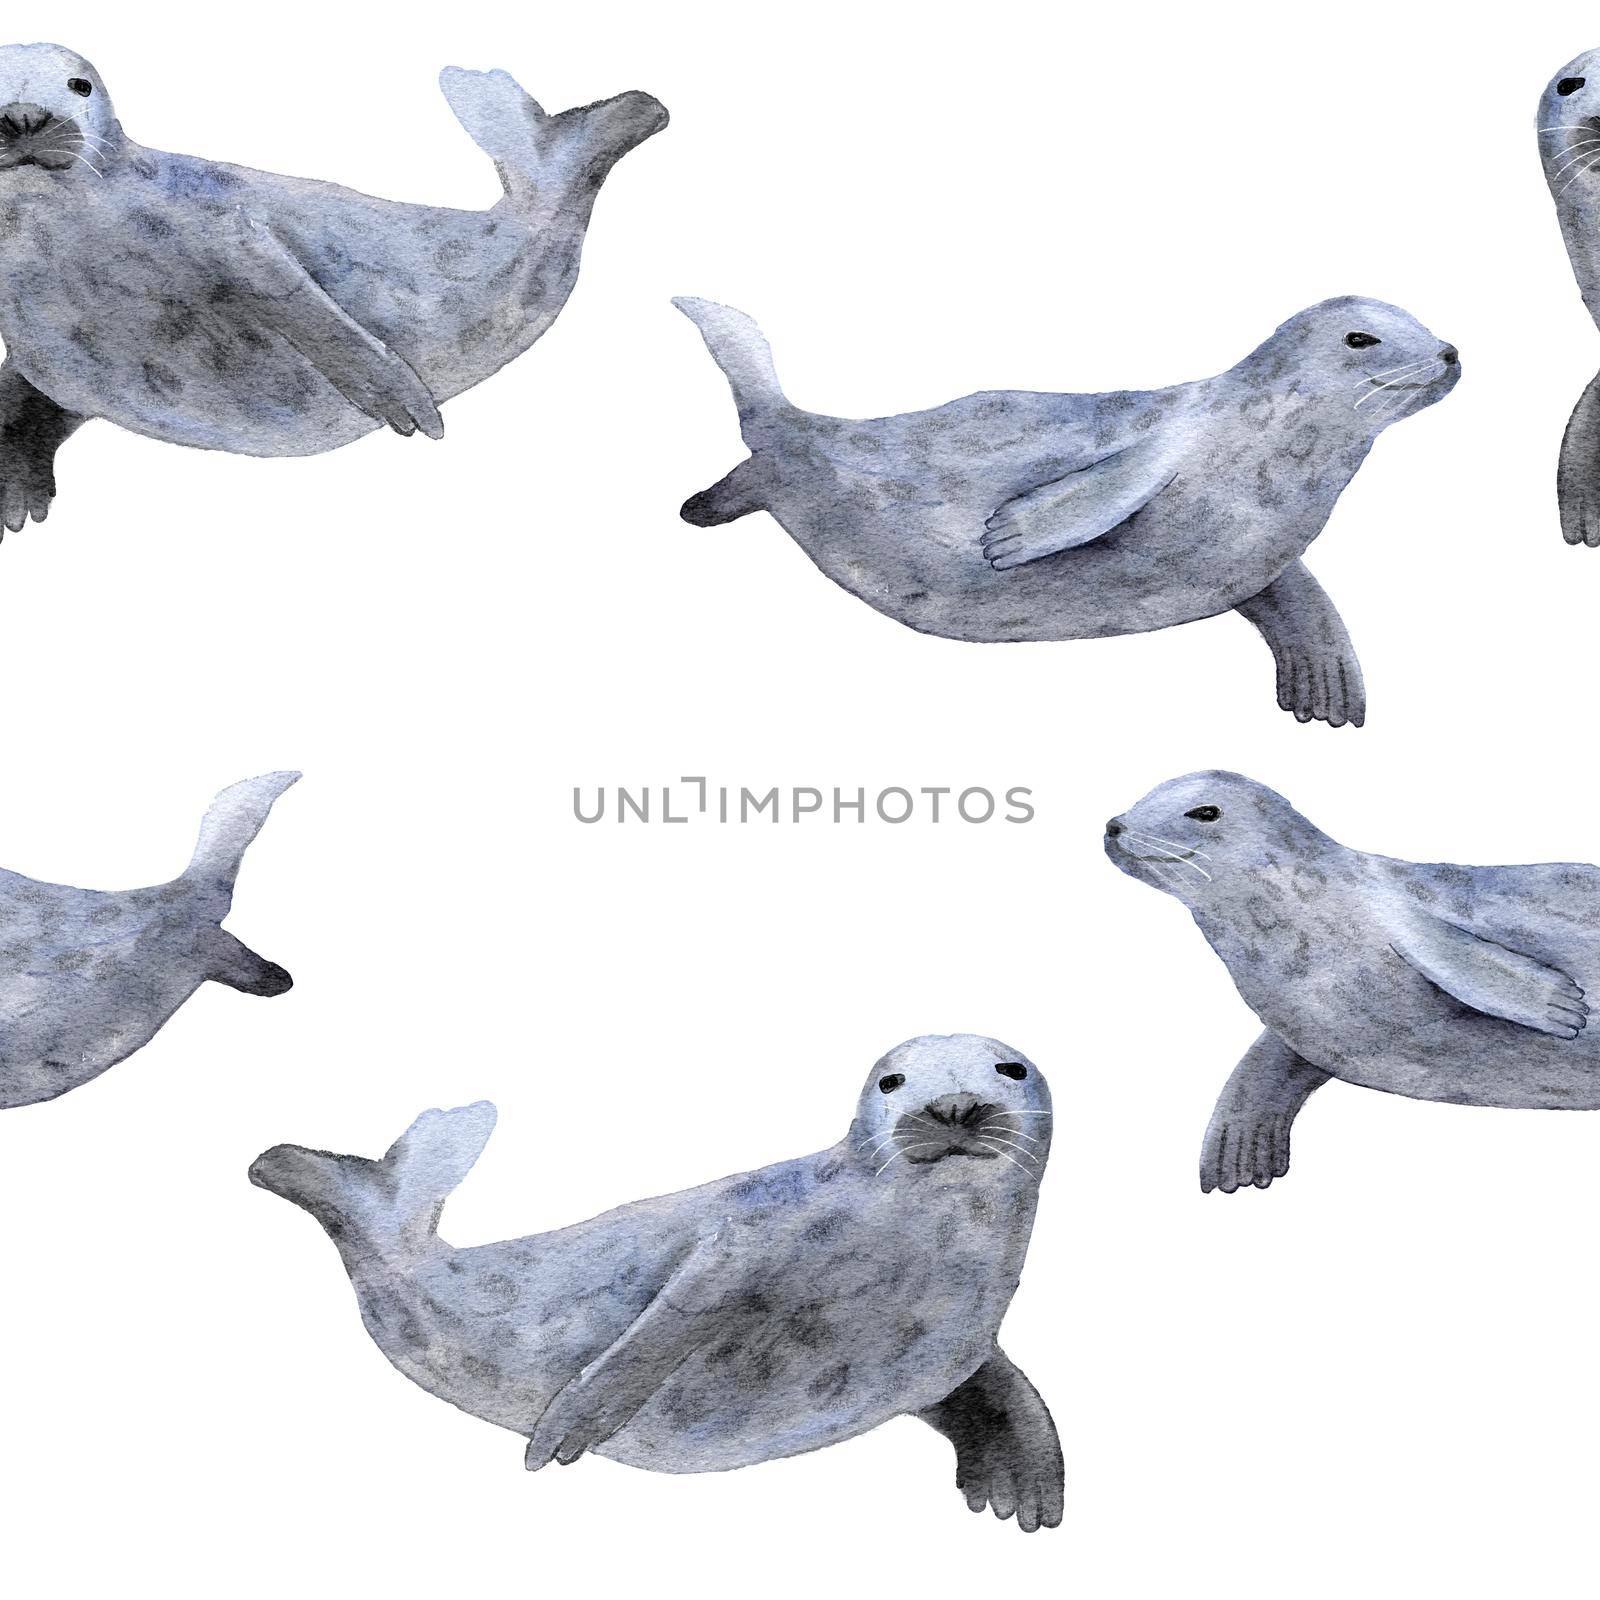 Hand drawn watercolor seamless pattern with seal. Sea ocean marine animal, nautical underwater endangered mammal species. Blue gray illustration for fabric nursery decor, under the sea prints